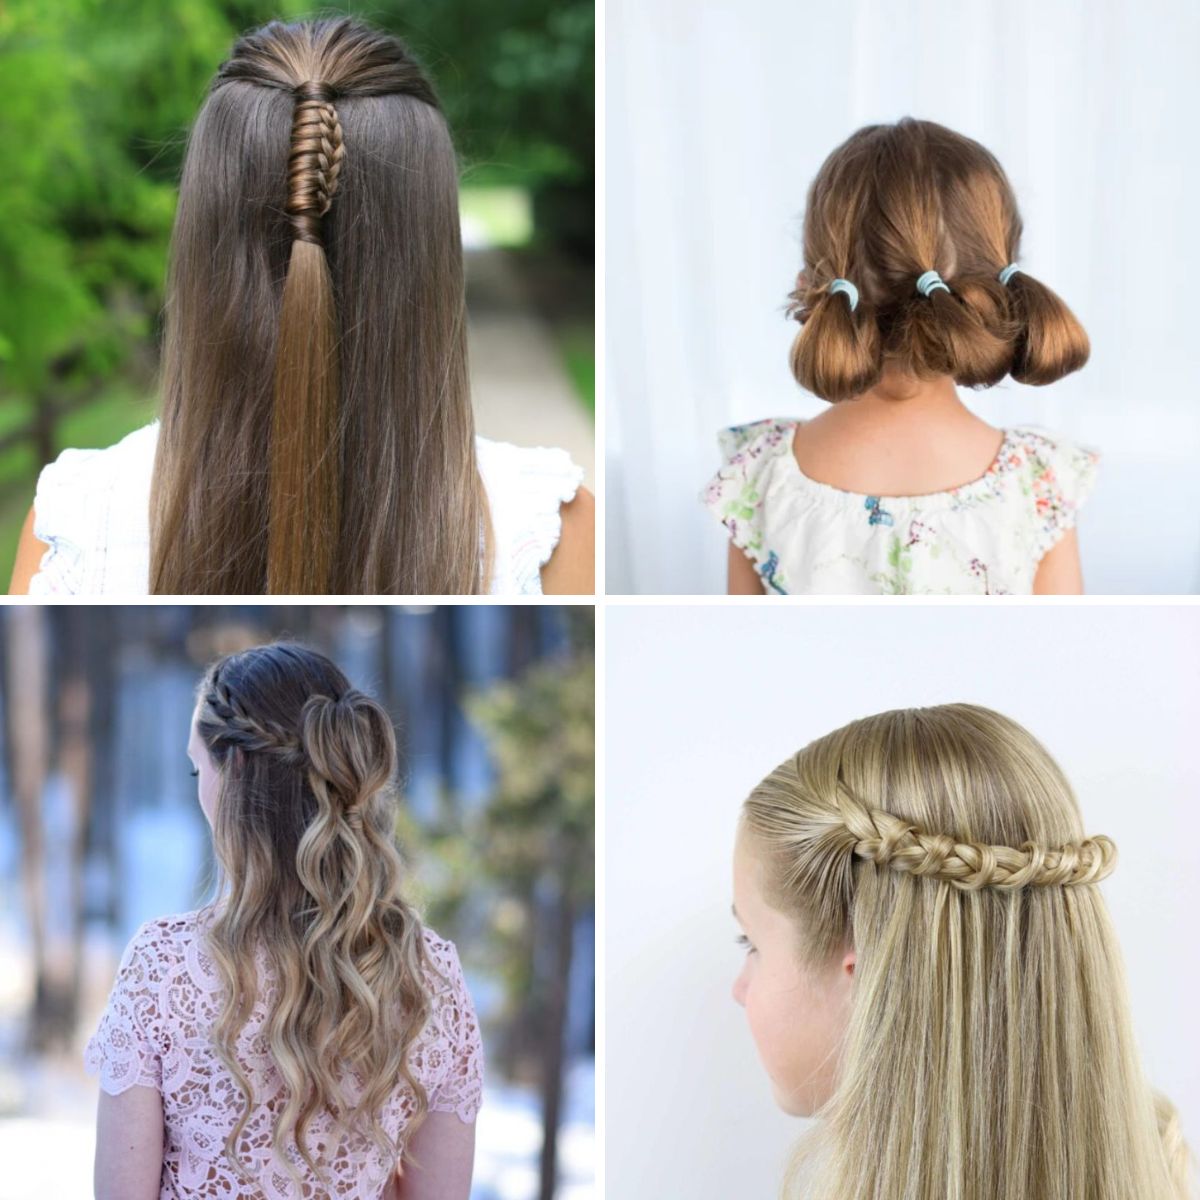 4 images of adorable ling hair hairstyles for girls.